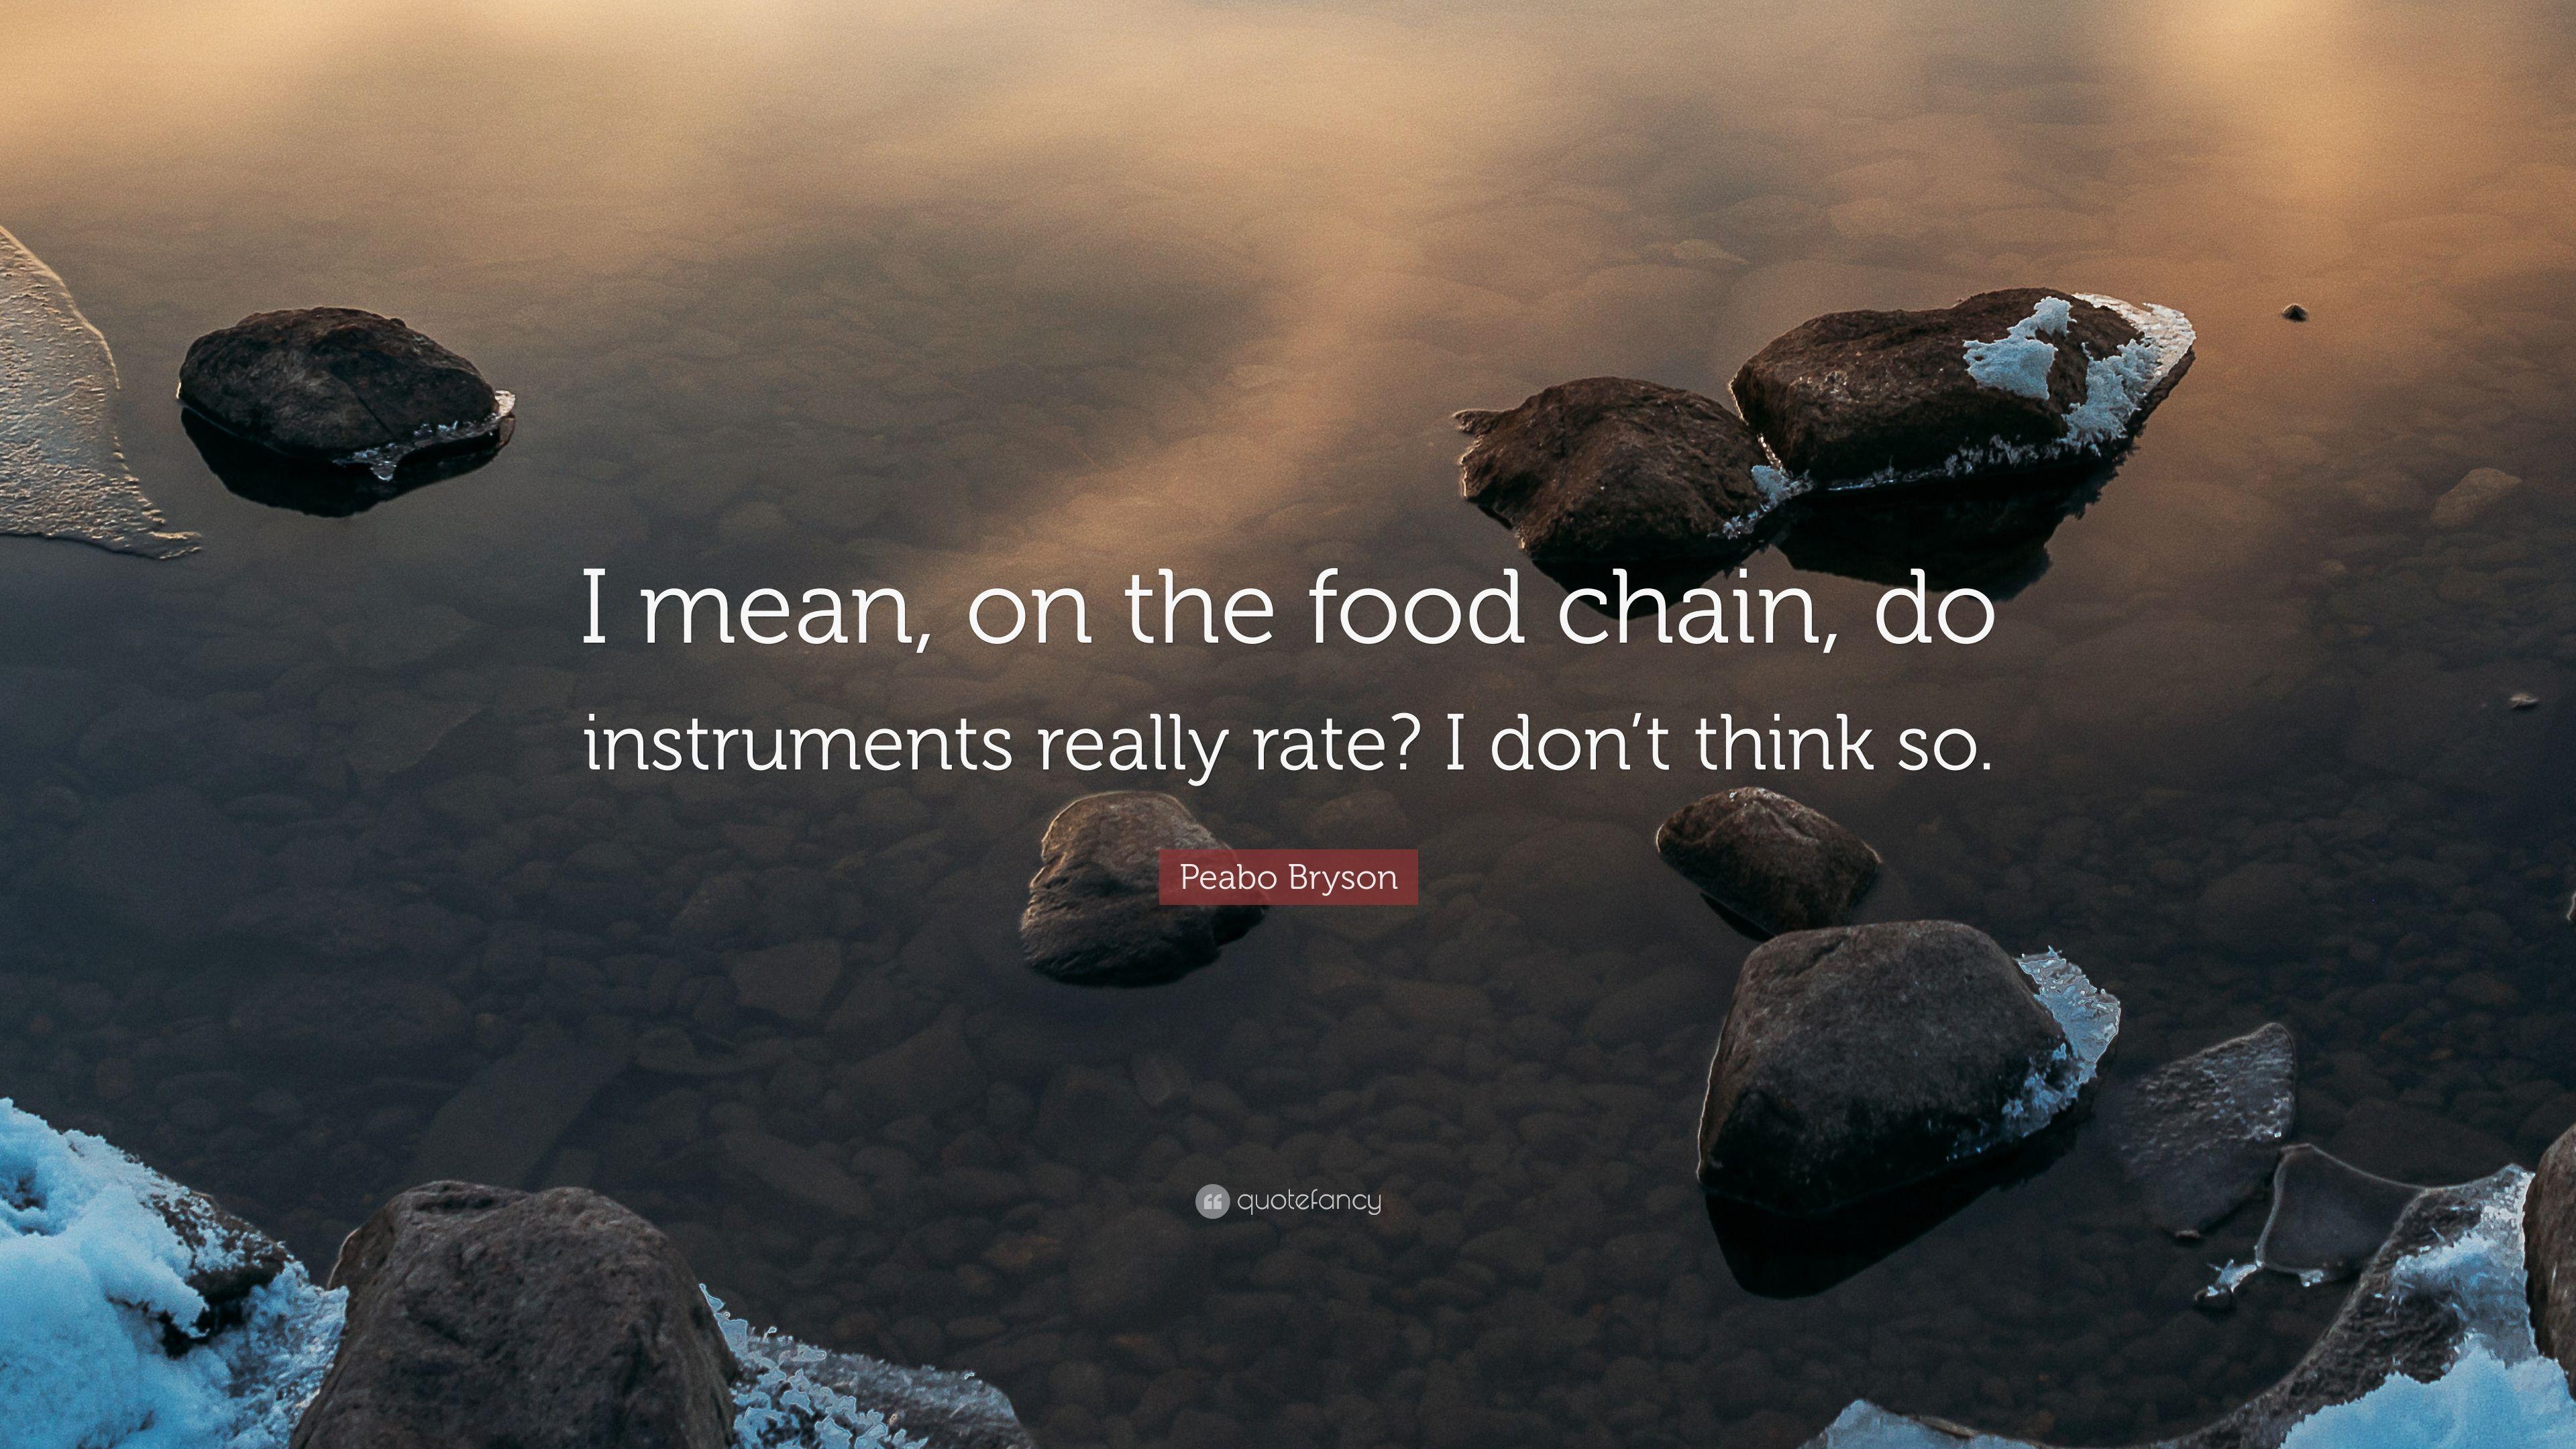 Peabo Bryson Quote: “I mean, on the food chain, do instruments